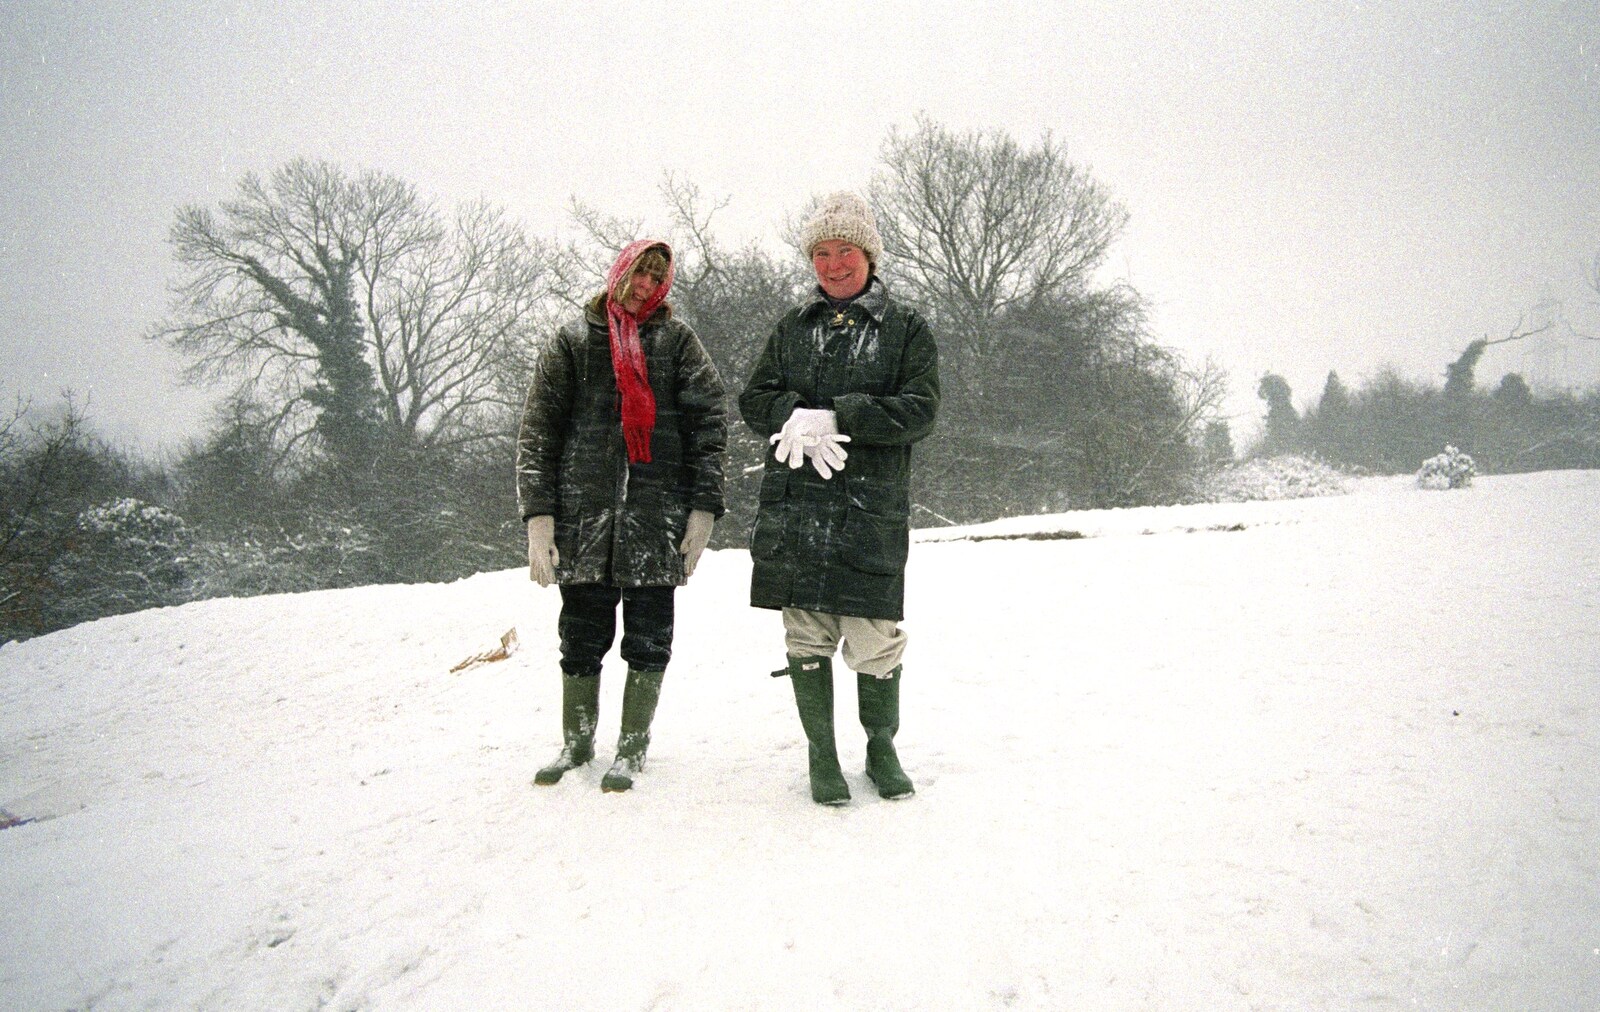 Janet and Brenda on Stuston Common from Sledging on the Common and Some Music, Stuston, Suffolk - 5th February 1991